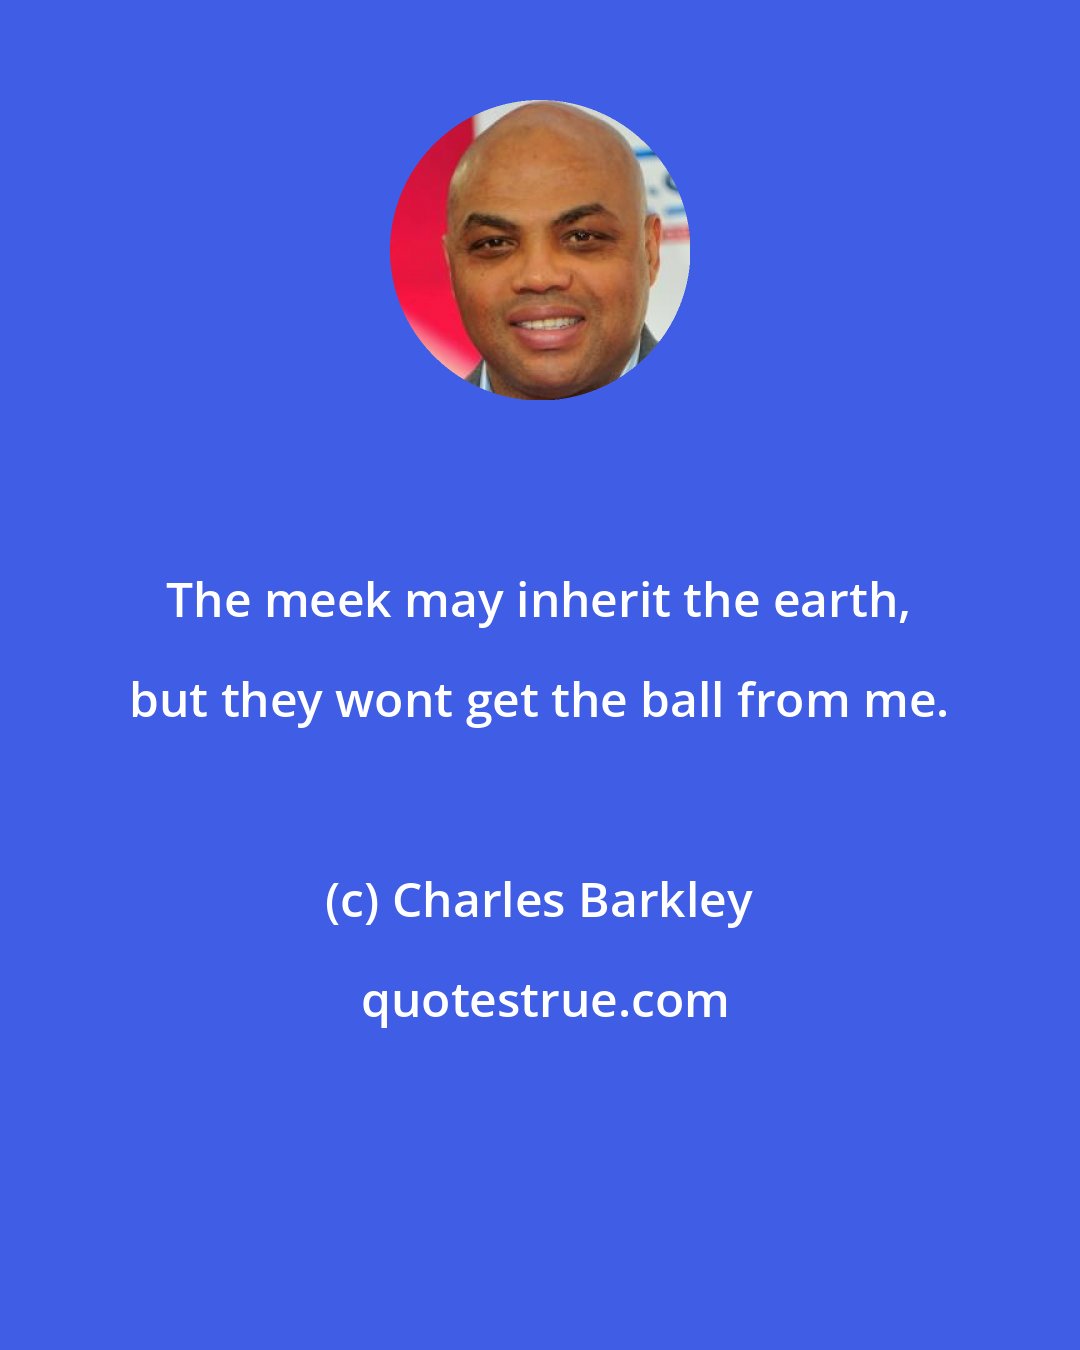 Charles Barkley: The meek may inherit the earth, but they wont get the ball from me.